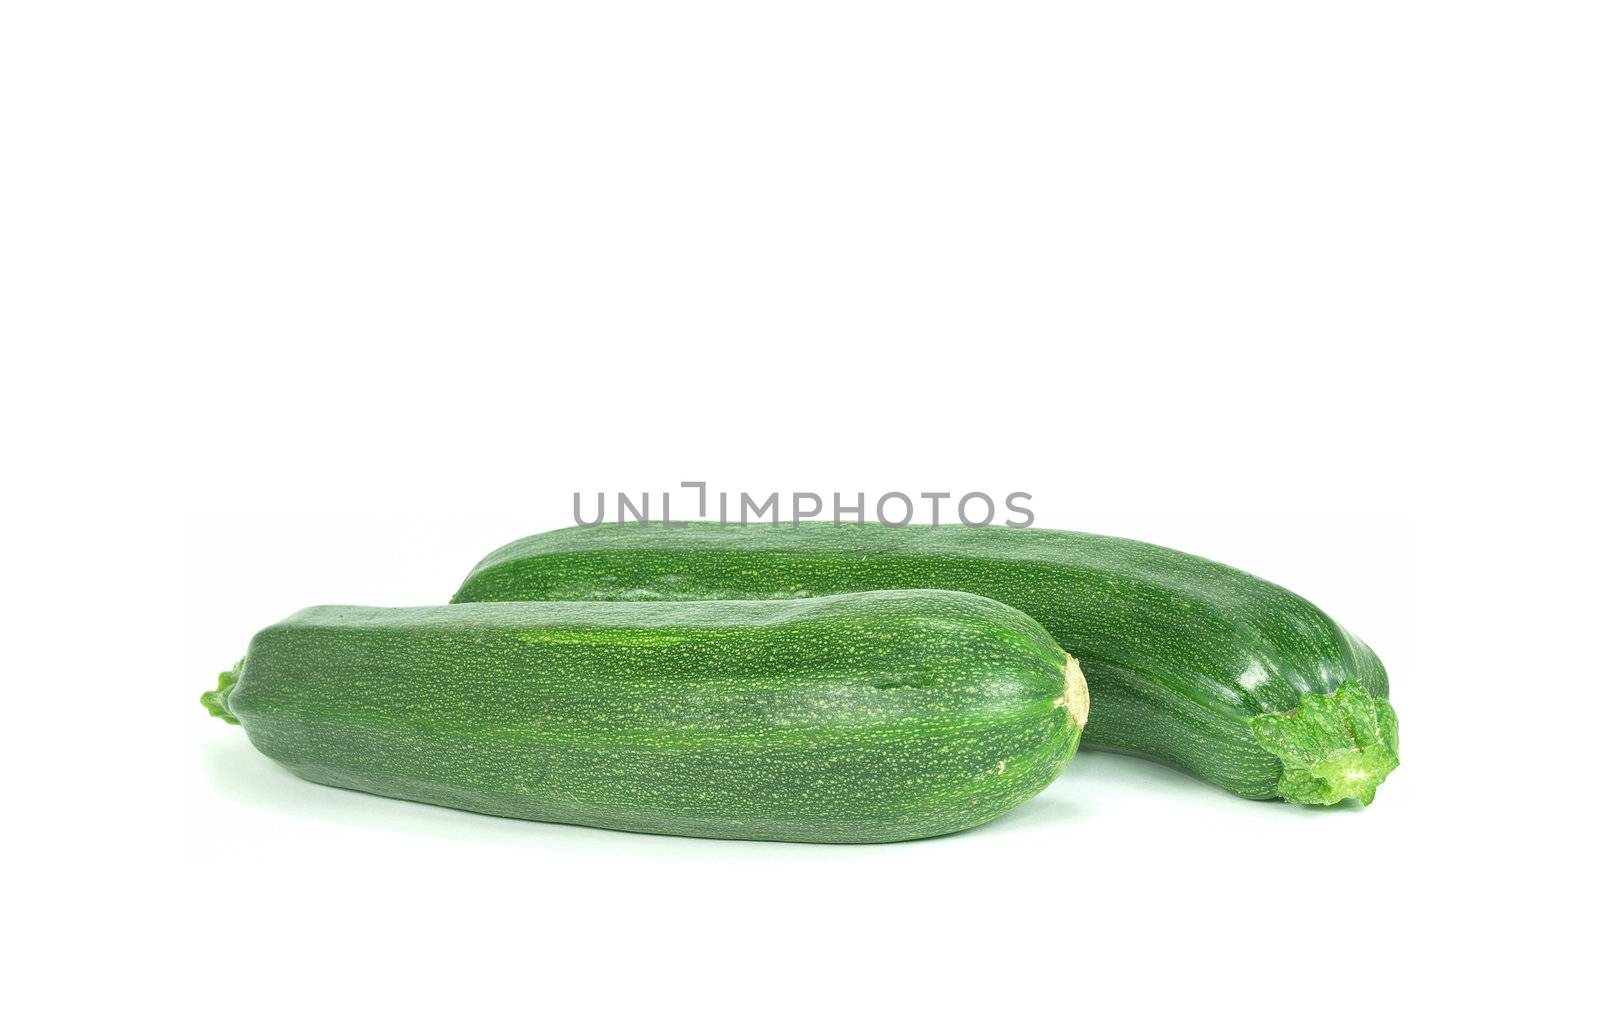 two fresh courgettes by Ric510